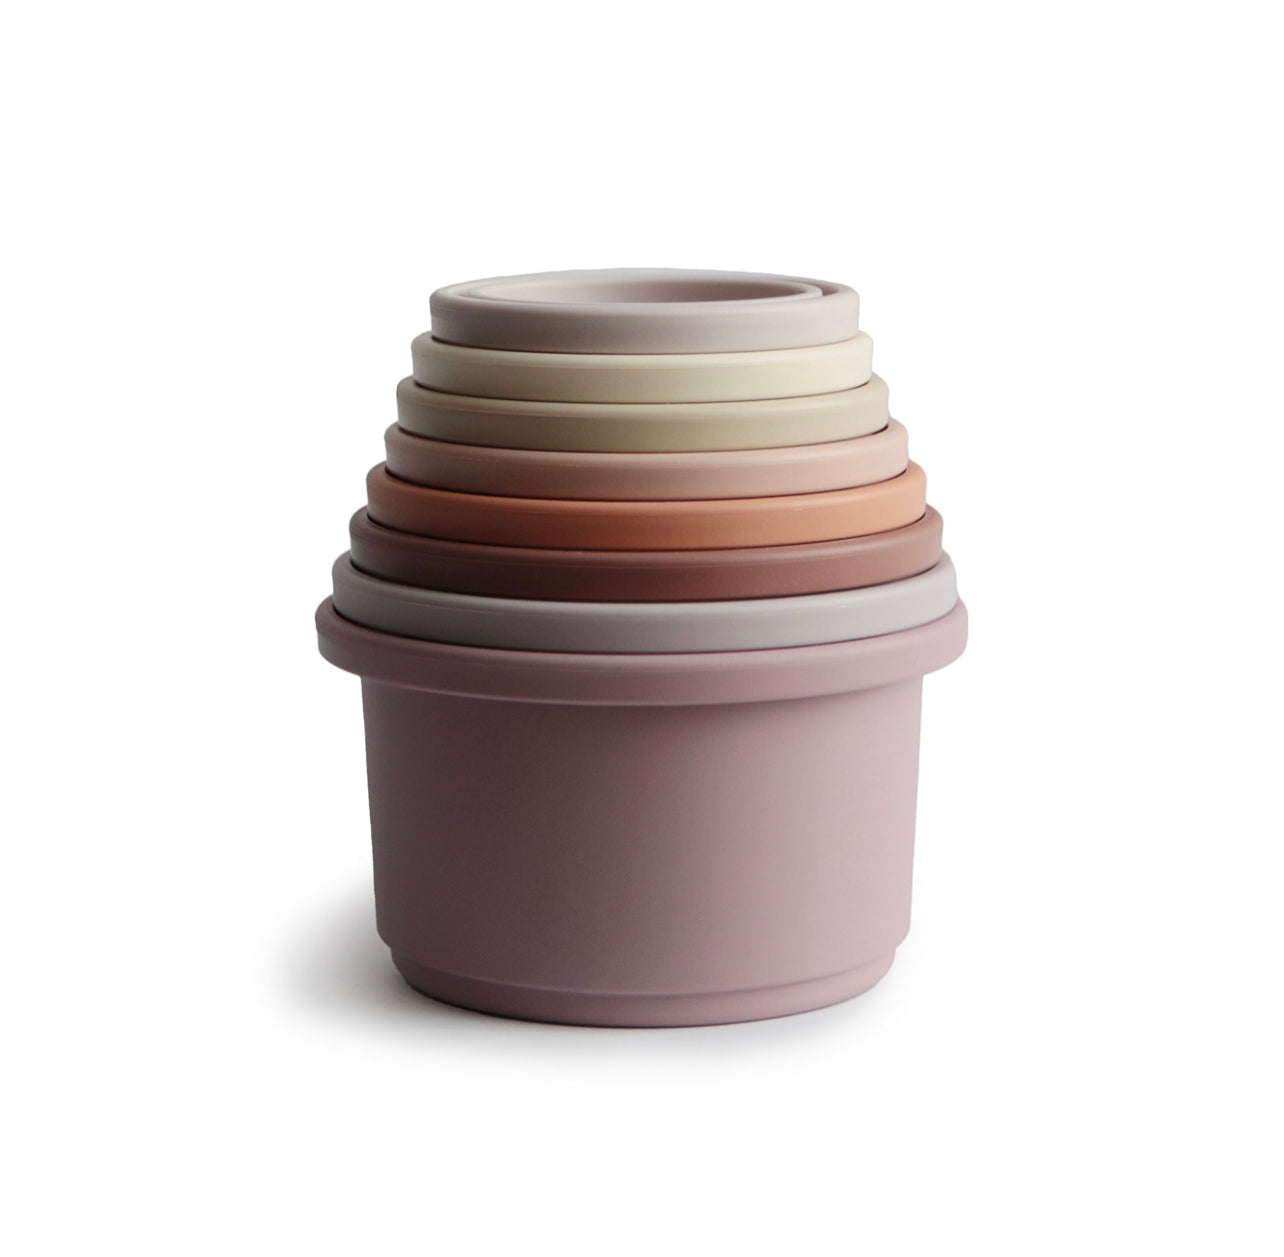 Stacking Cups Toy - Petal